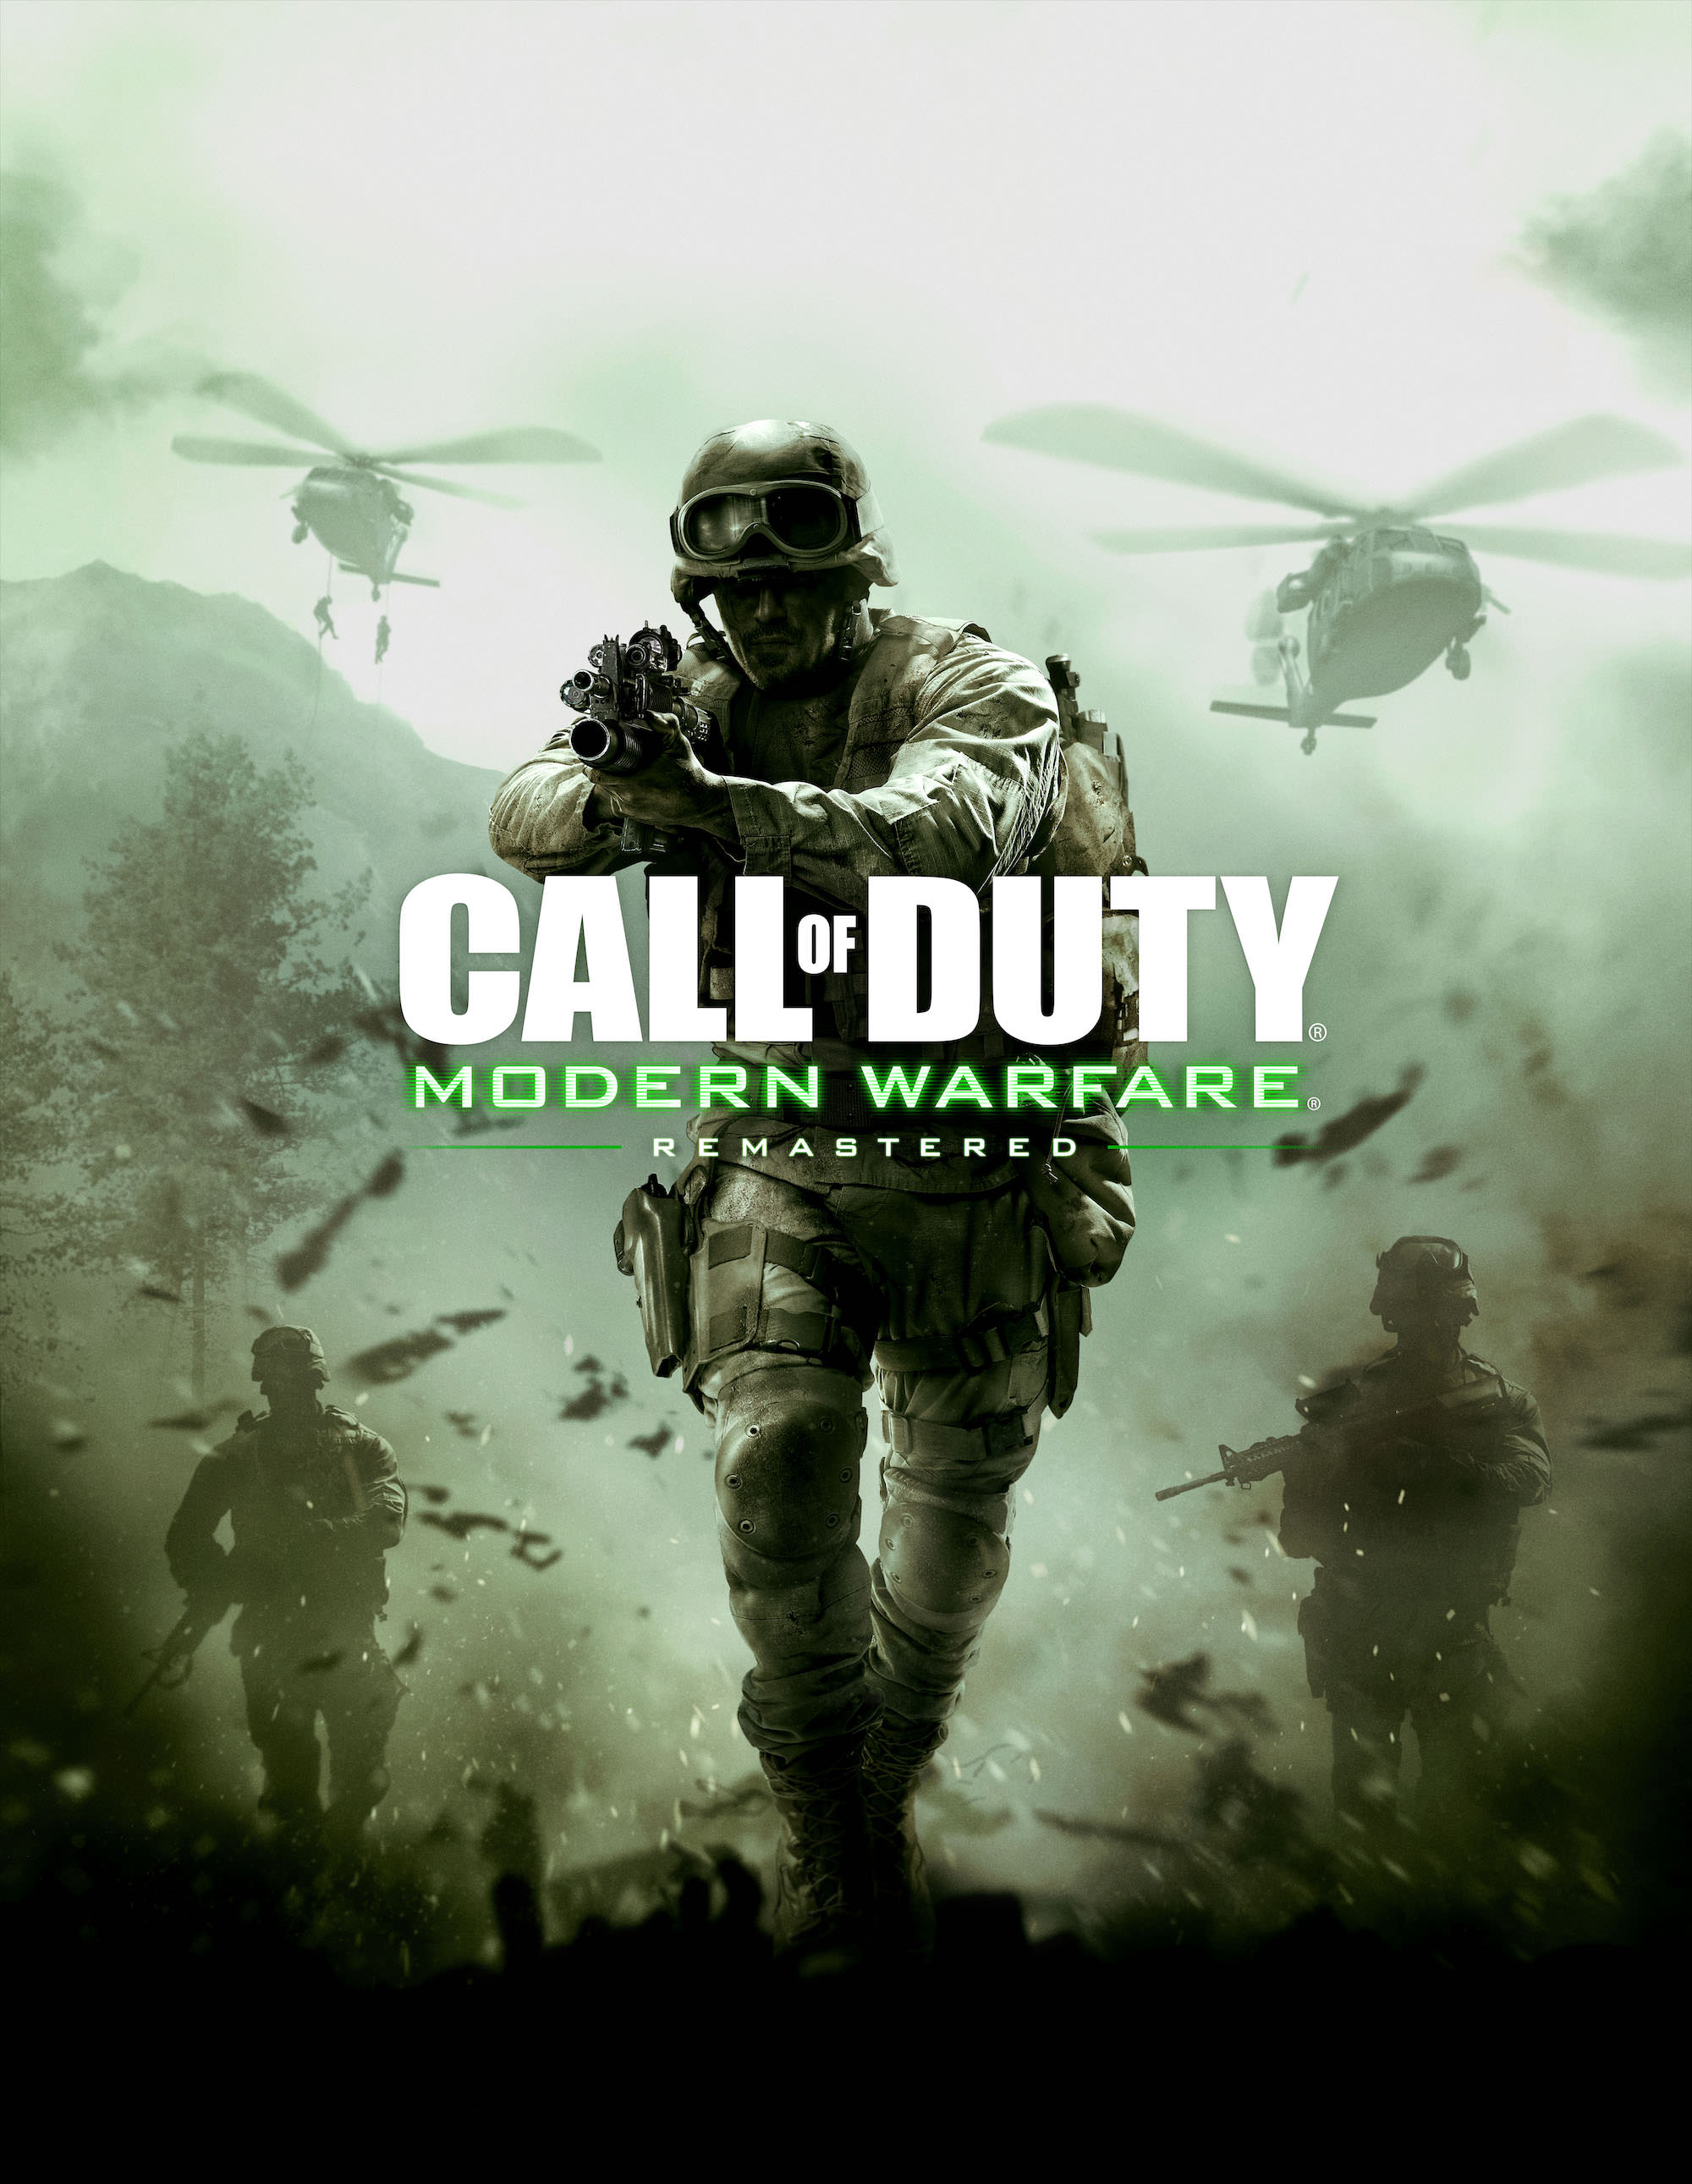 call of duty modern warfare remastered wallpaper,action adventure game,pc game,soldier,movie,shooter game